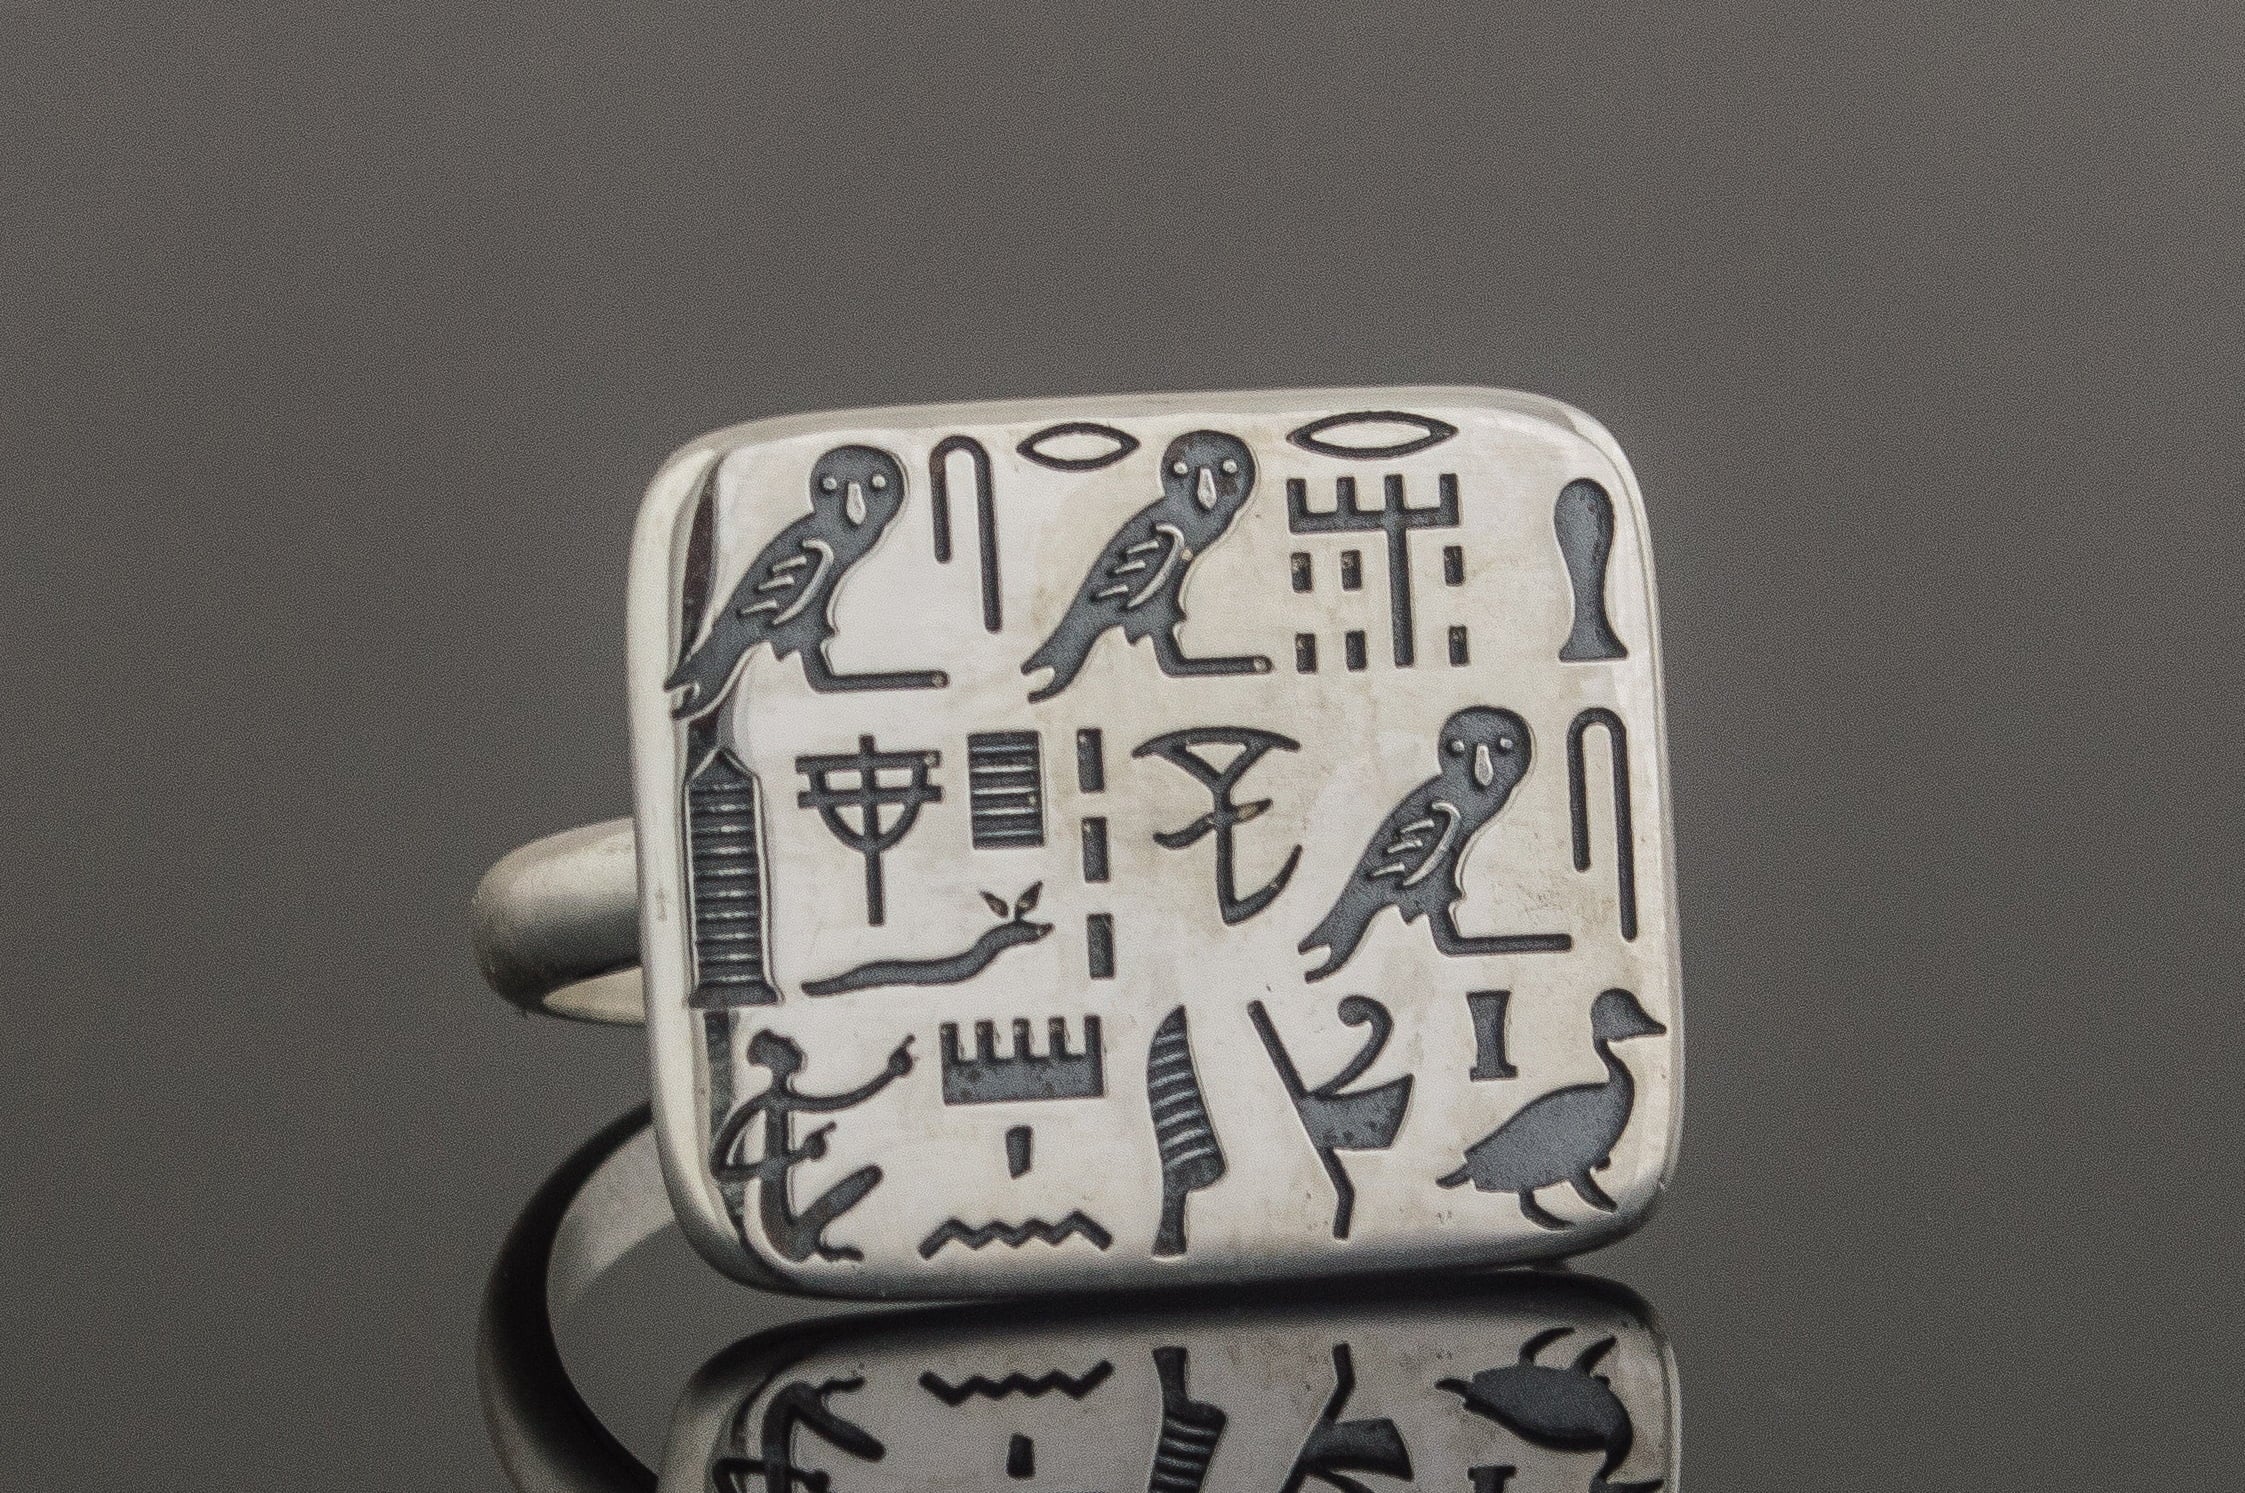 Unique Ring with Egypt Symbols Sterling Silver Jewelry